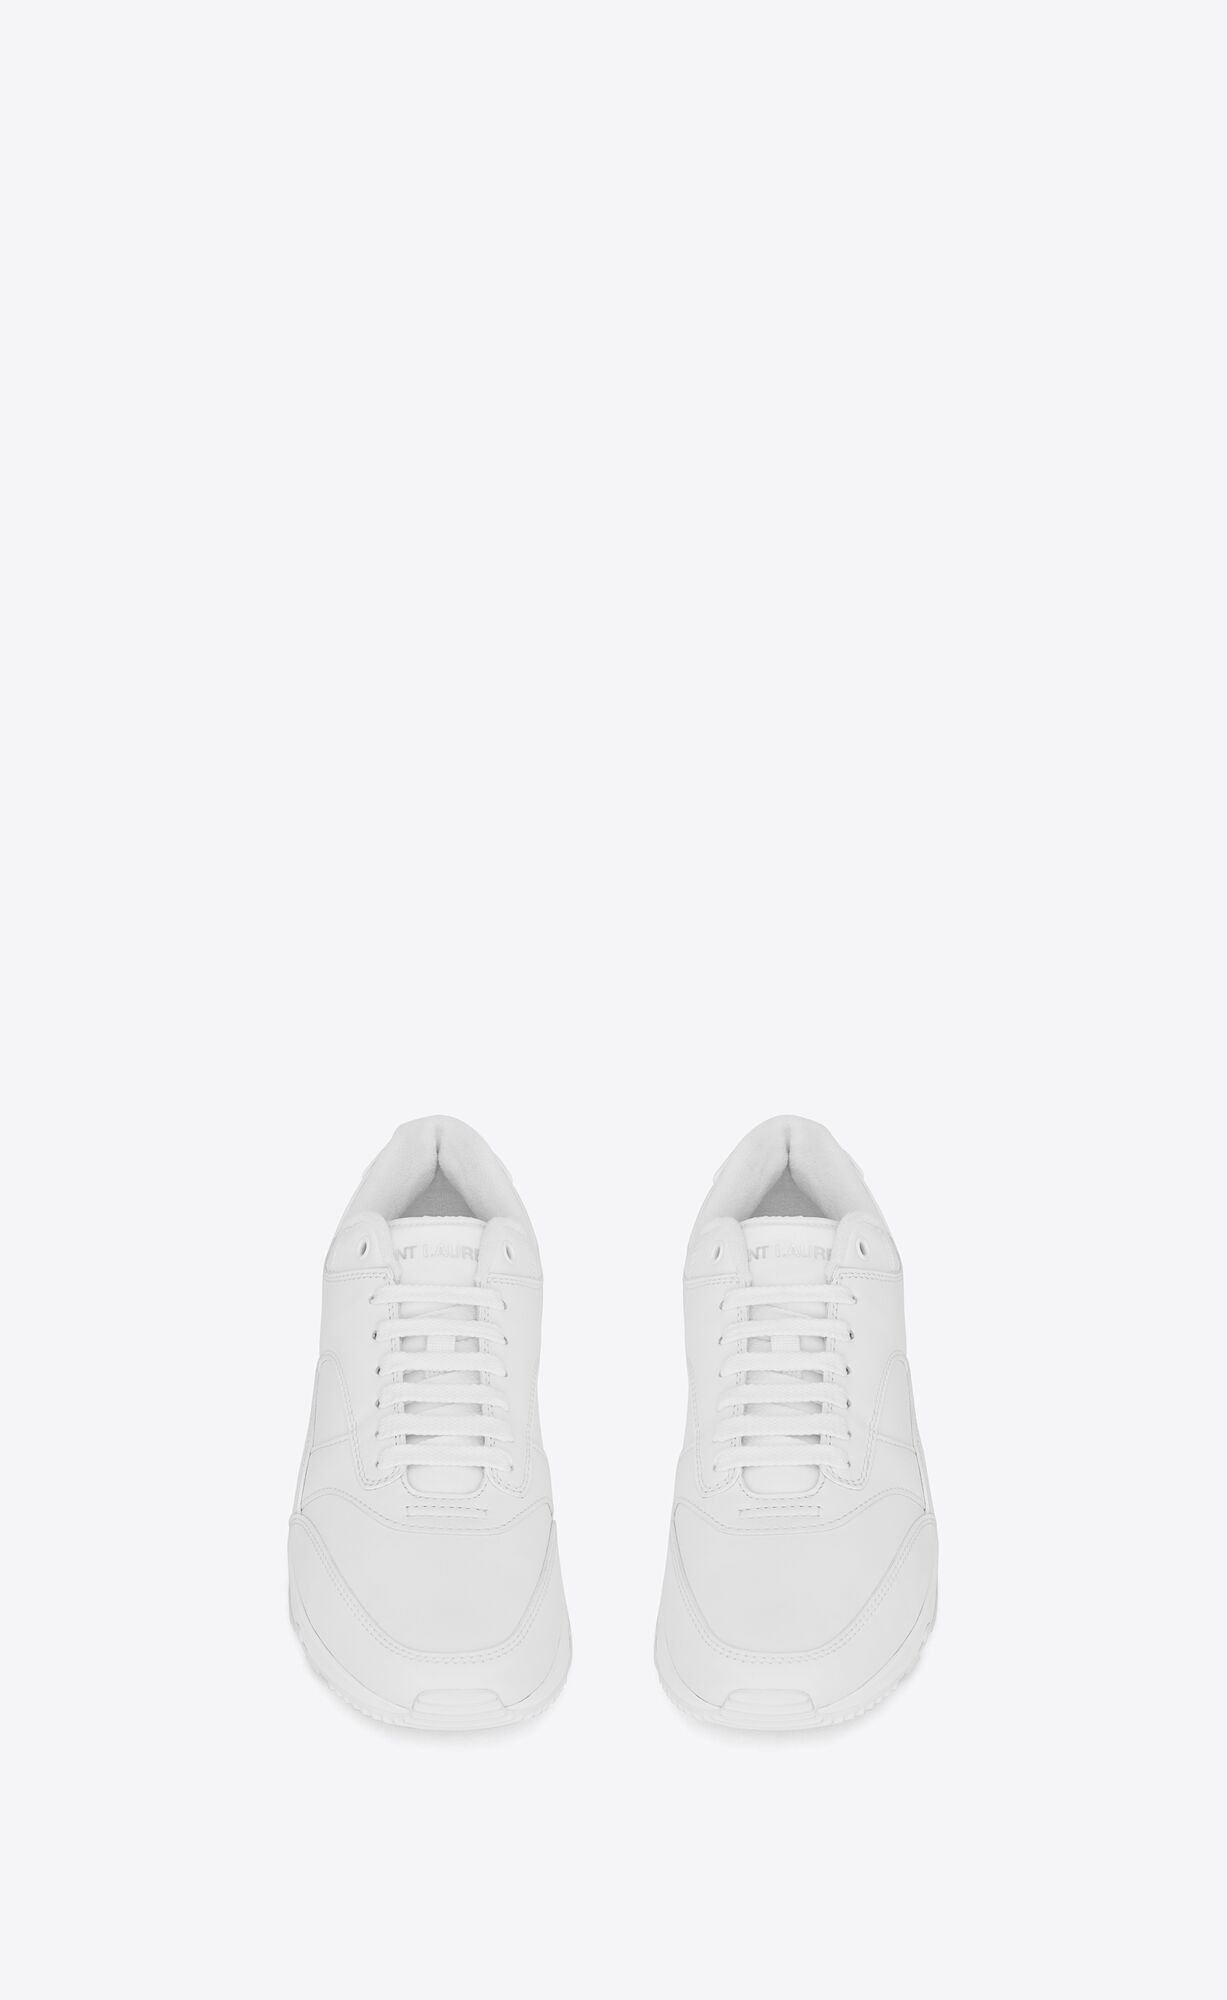 BUMP sneakers in smooth leather | Saint Laurent | YSL.com